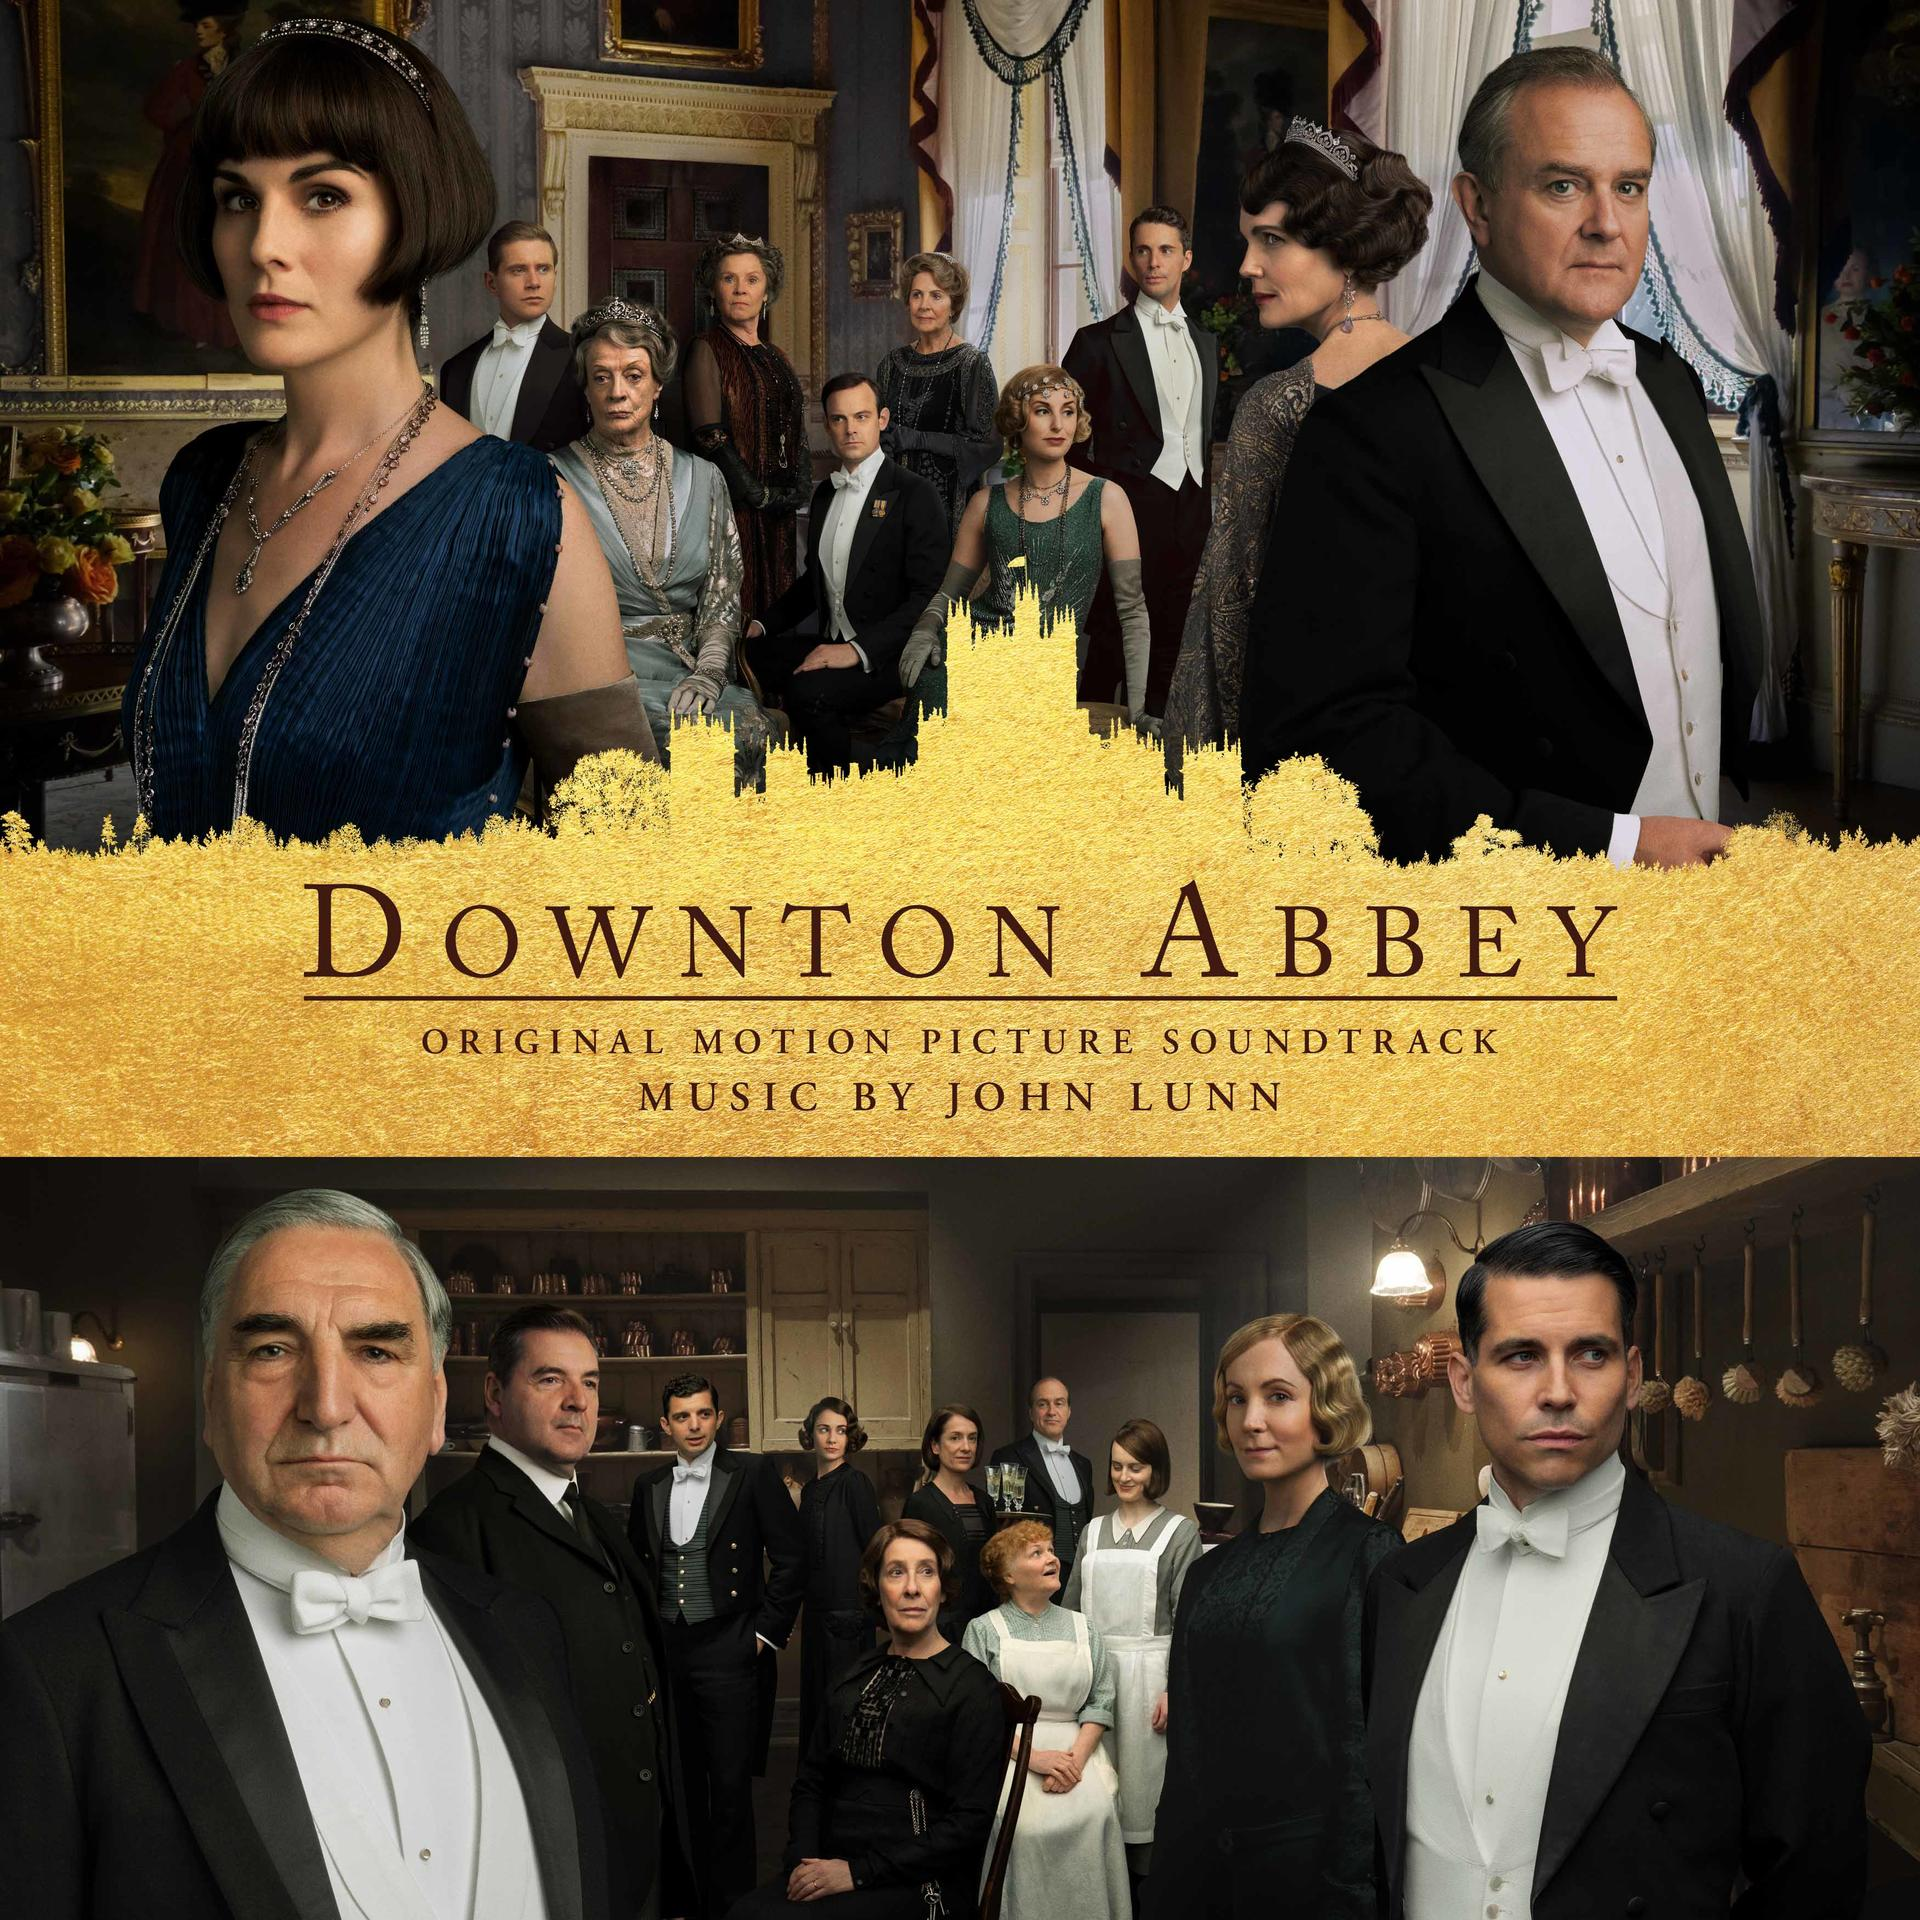 Orchestra John London, The Lunn Abbey Of Downton - Chamber (CD) -